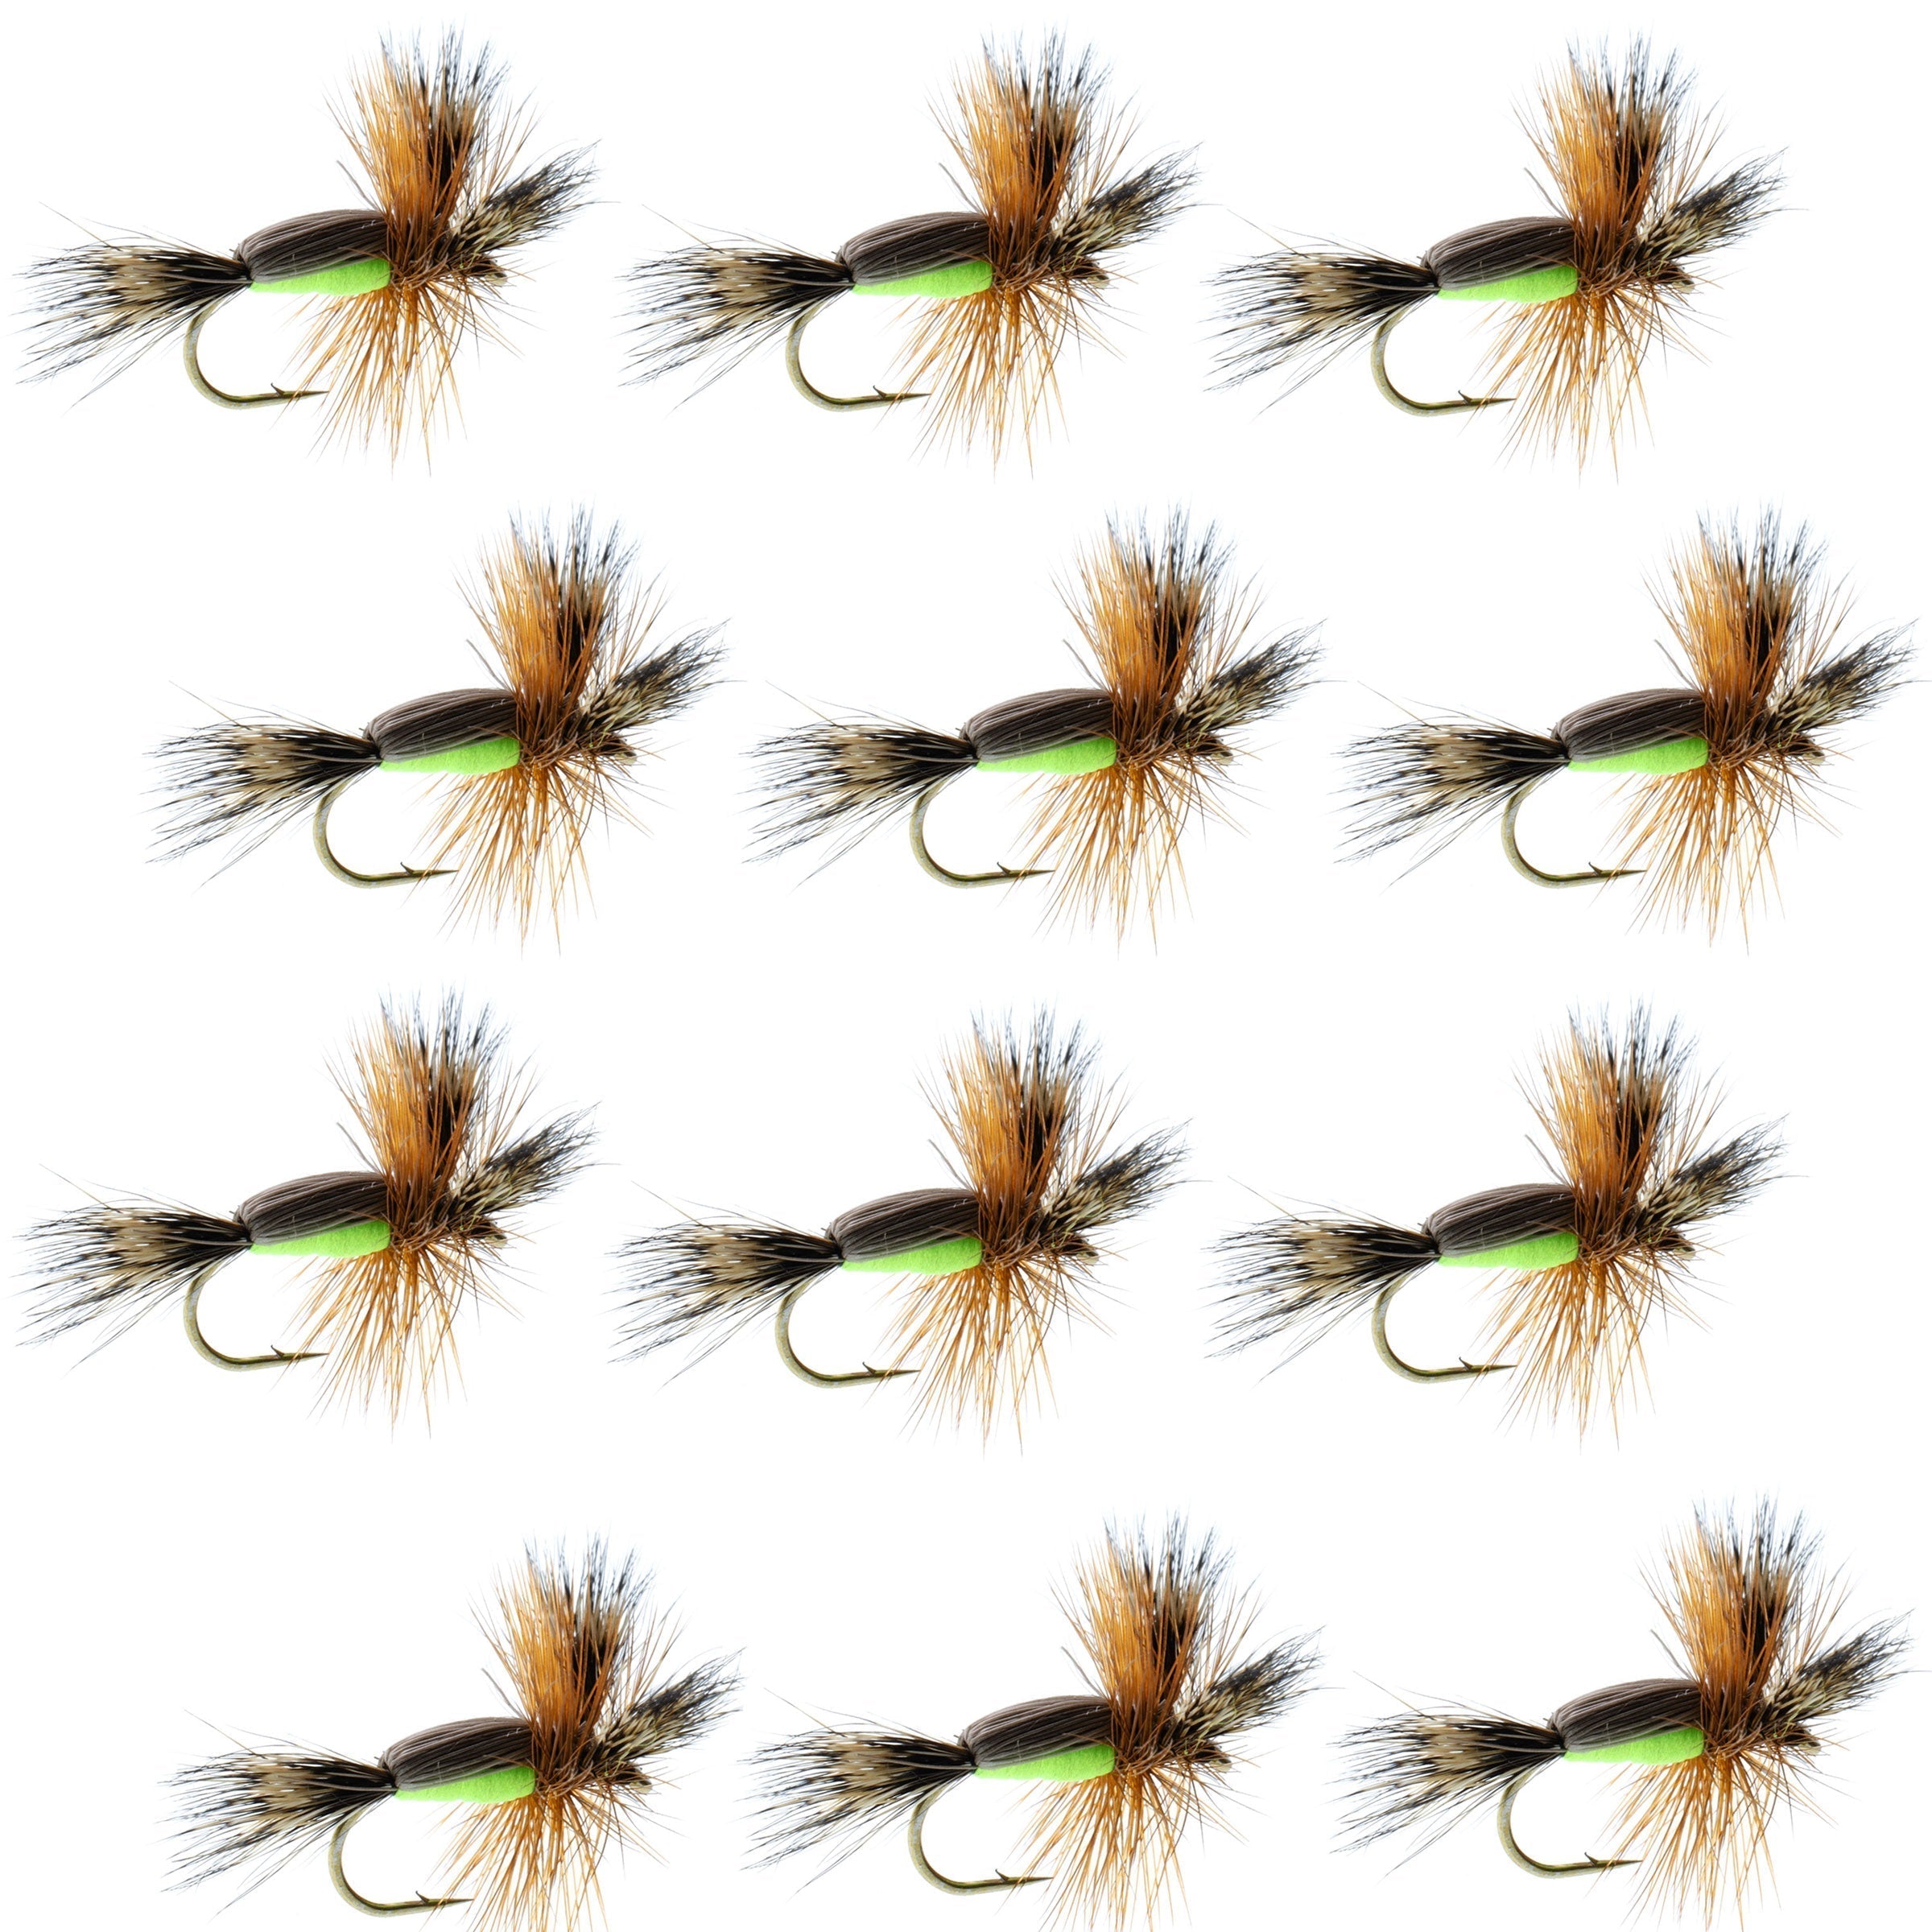 Chartreuse Humpy Classic Hair Wing Dry Fly - 1 Dozen Flies Hook Size 16